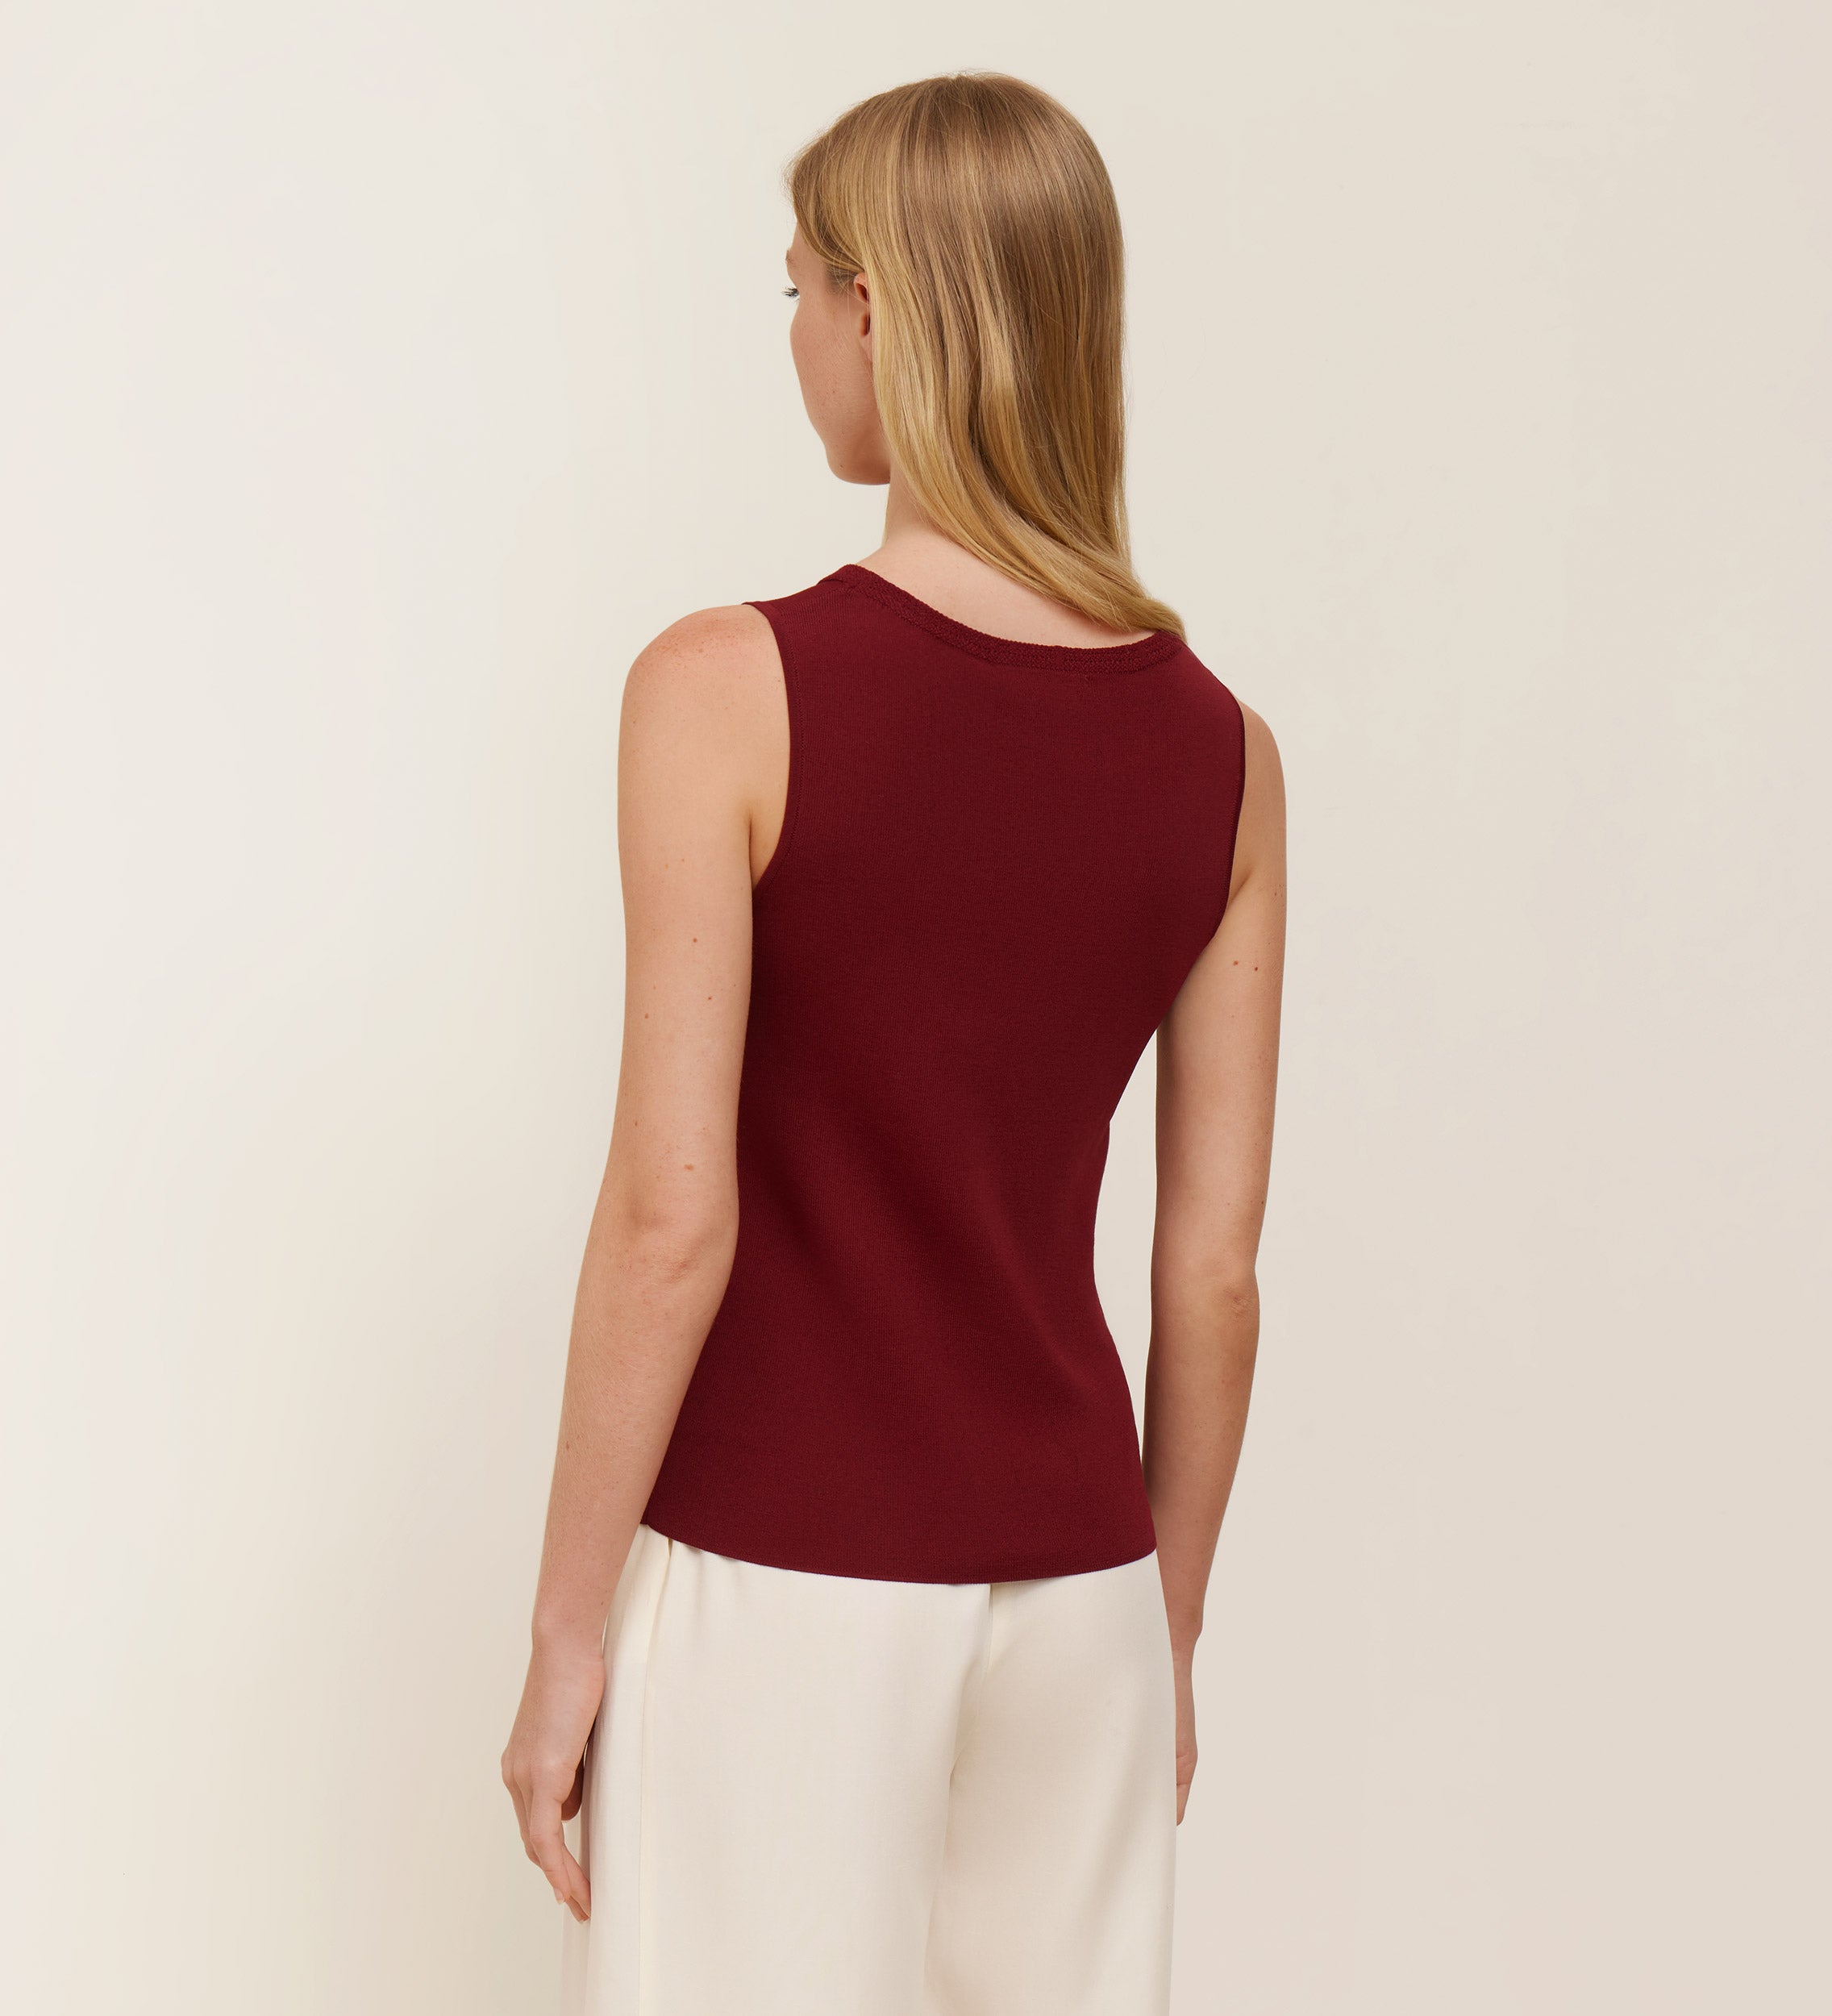 Tricot top with armholes